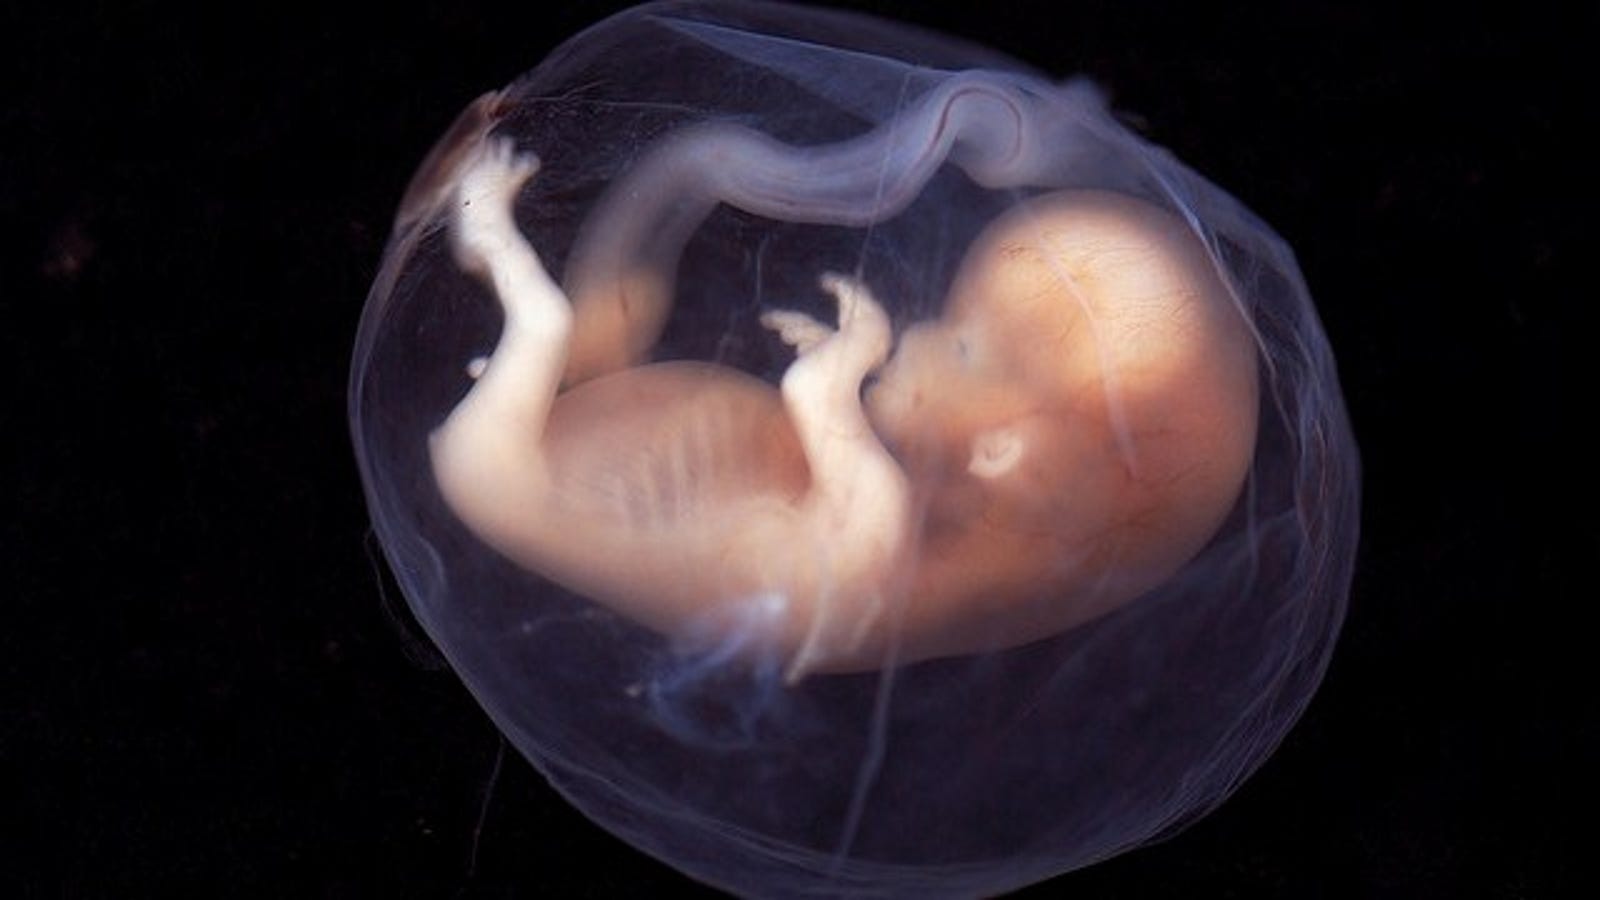 New photographs reveal that fetuses yawn in the womb